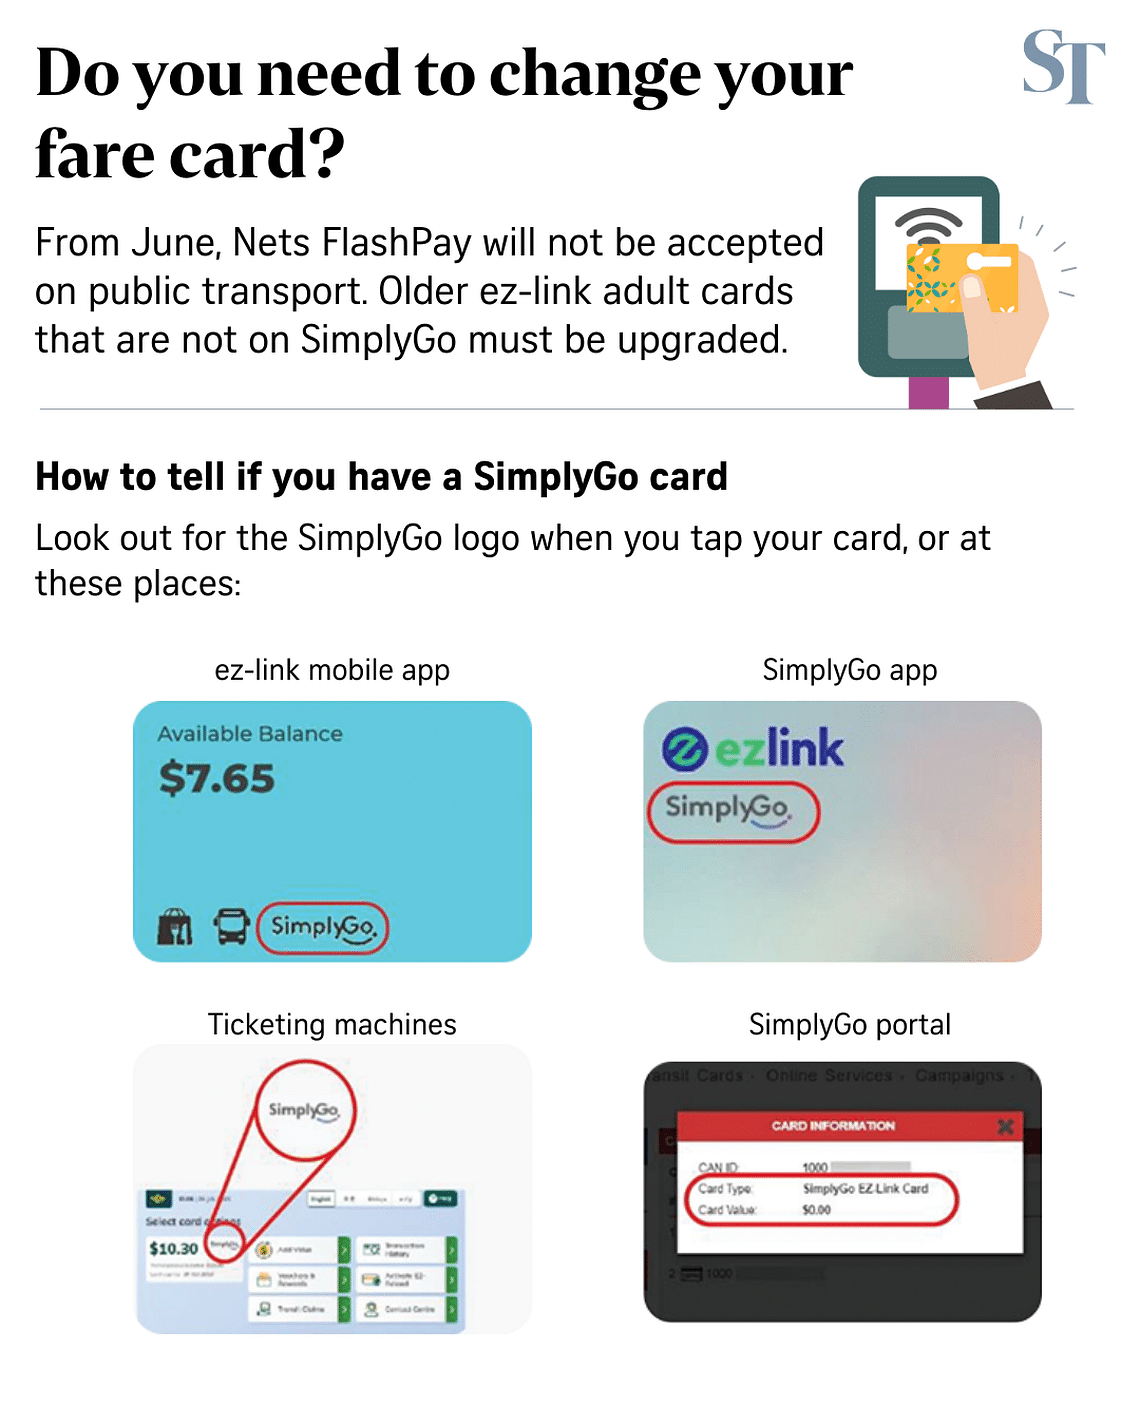 Older Ez Link Cards Not Valid For Public Transport From June Singapore News Asiaone